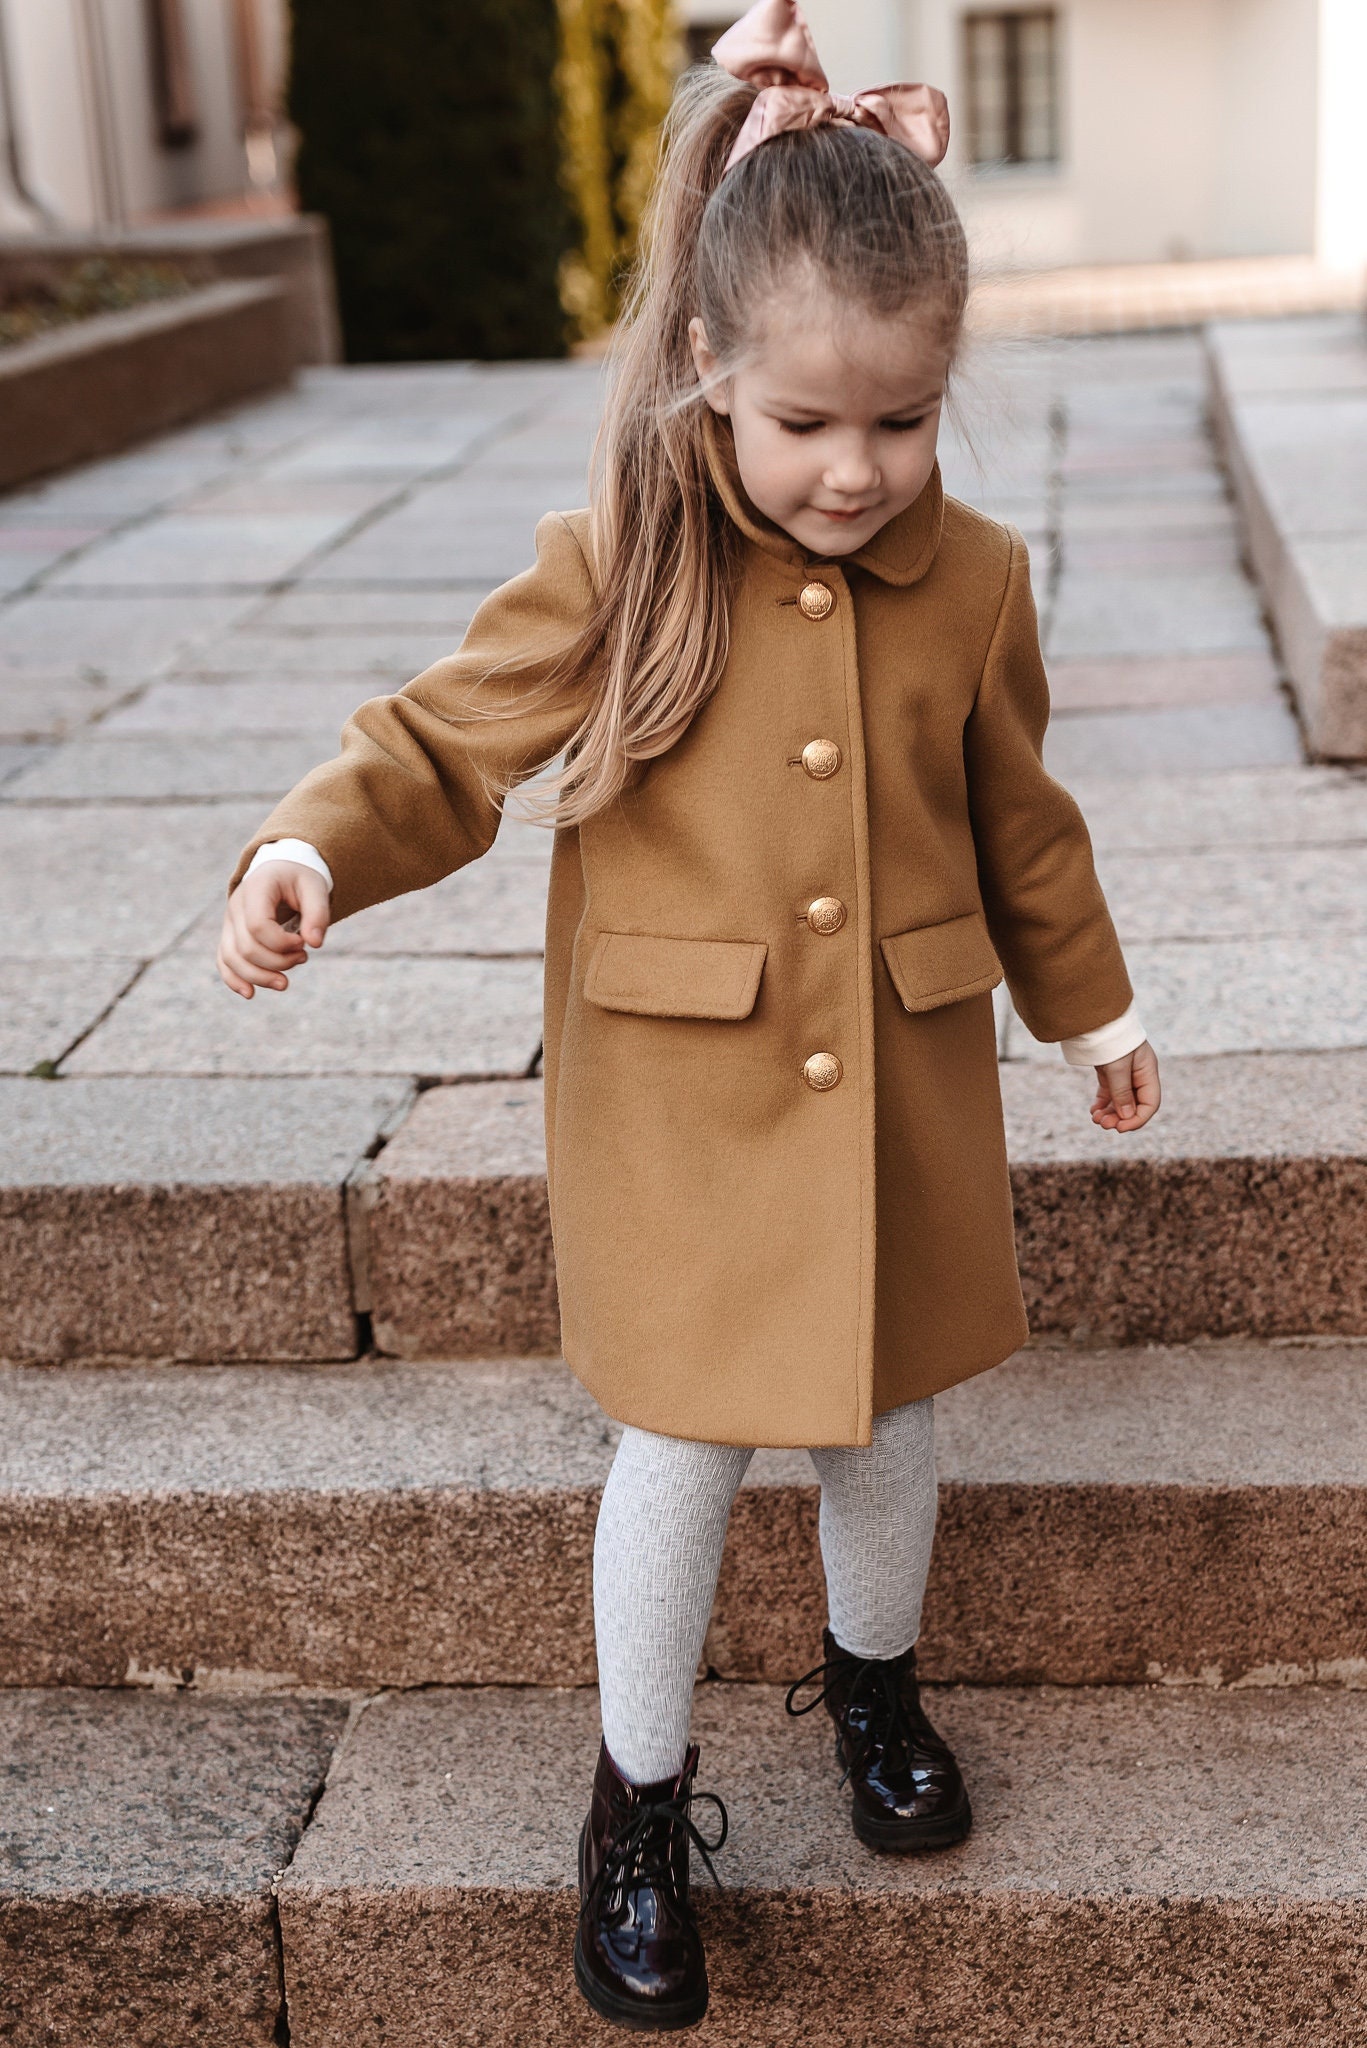 Long Sleeve Girl's Jacket, Golden Buttons Fastening, Classic Style Autumn  Wear for Toddler Girl, Suitable for EU Size 92 -  Canada